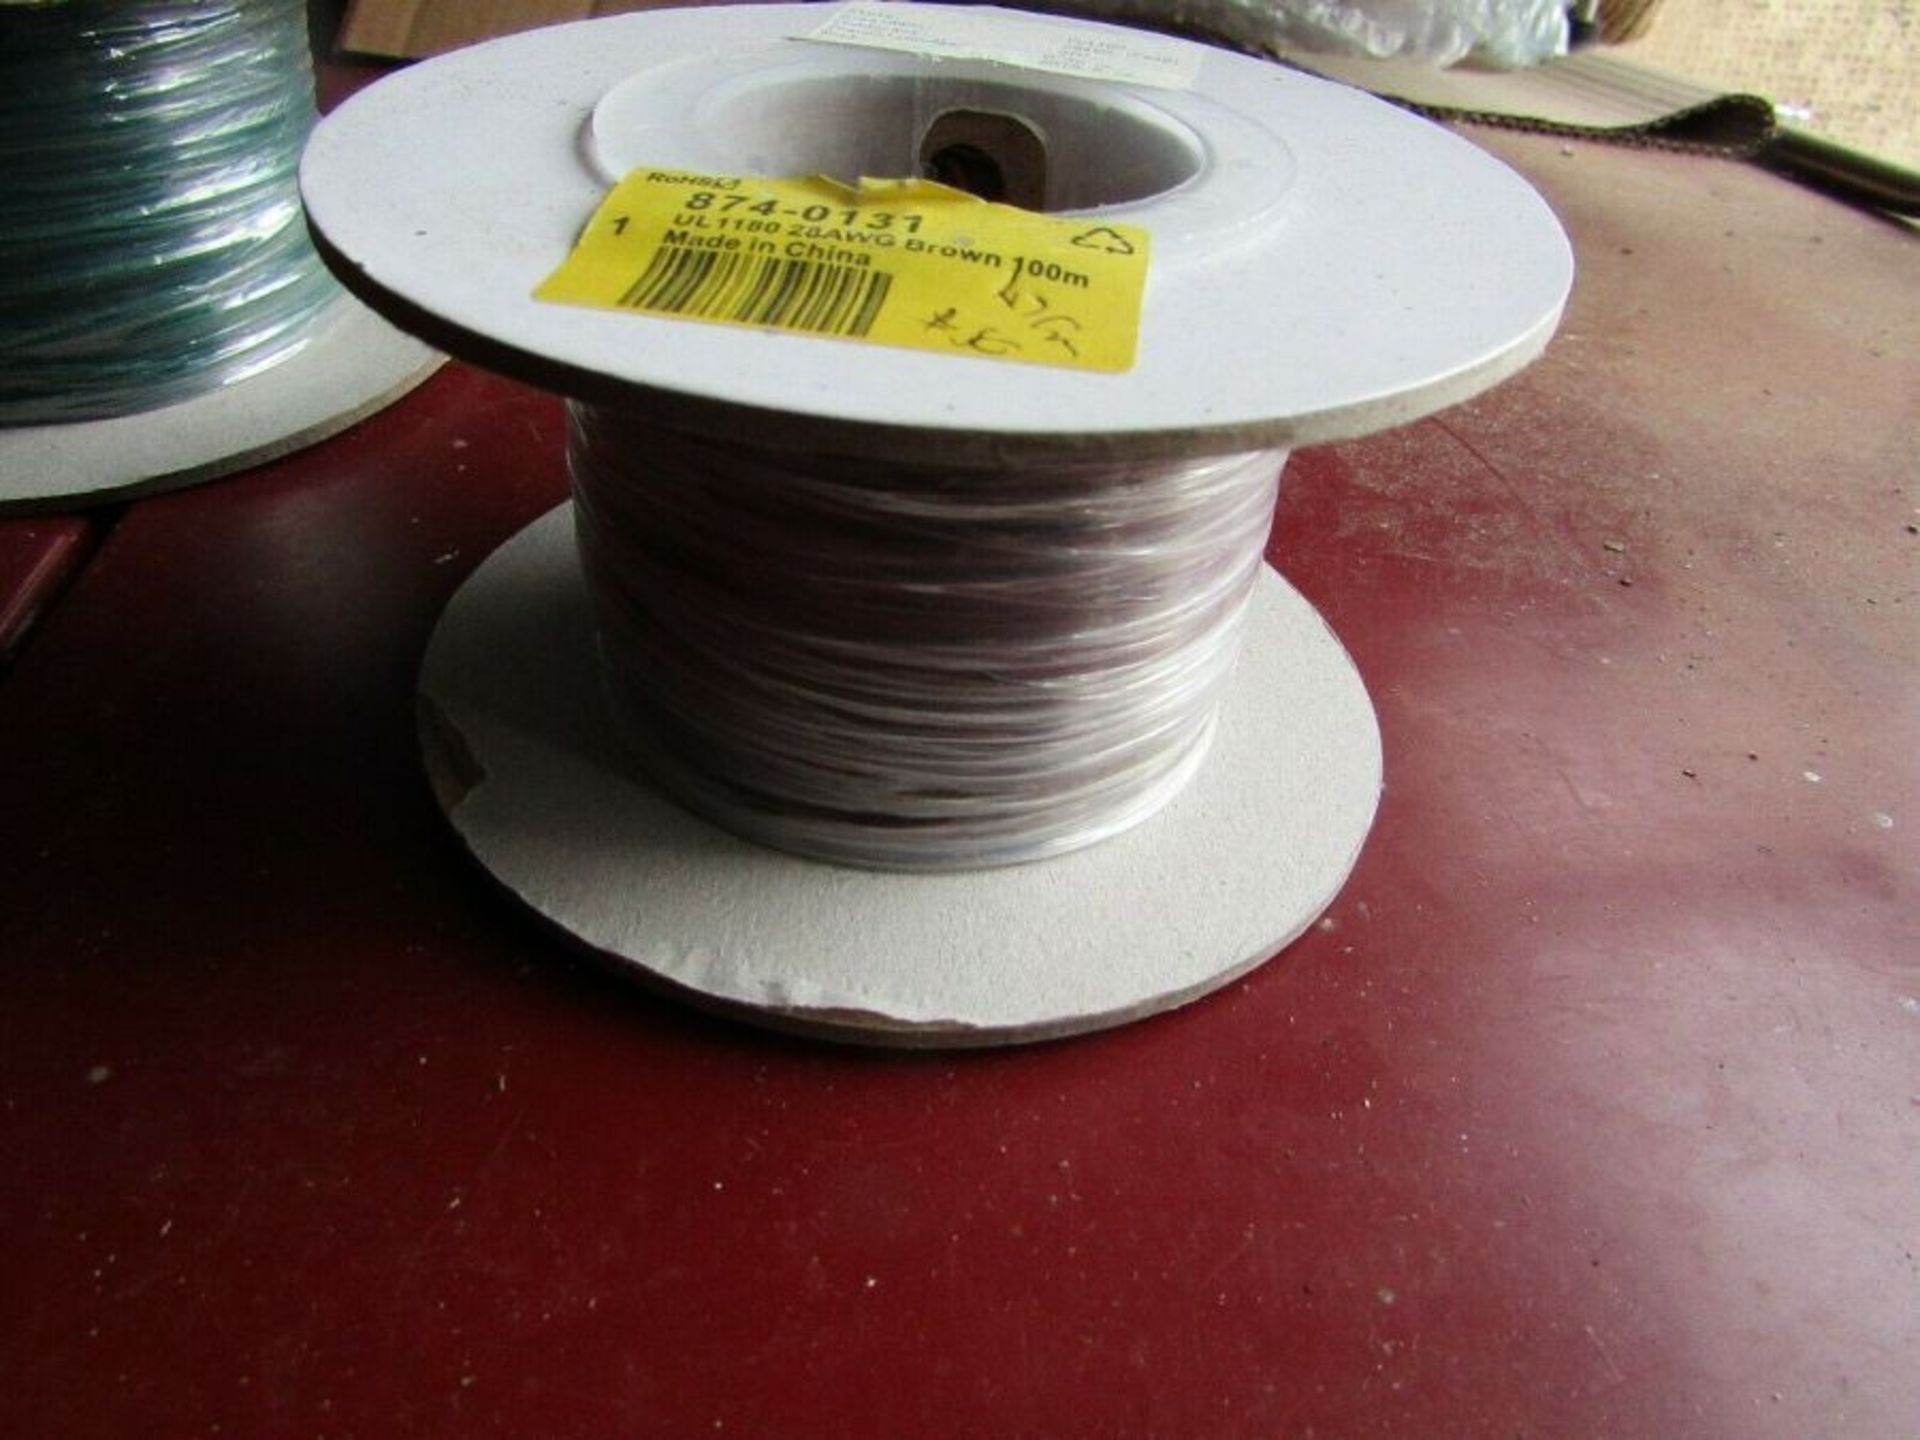 150 x 100m Reels of Assorted Cable / Hook Up Wire - 30 reels each of 5 different items - Image 2 of 6